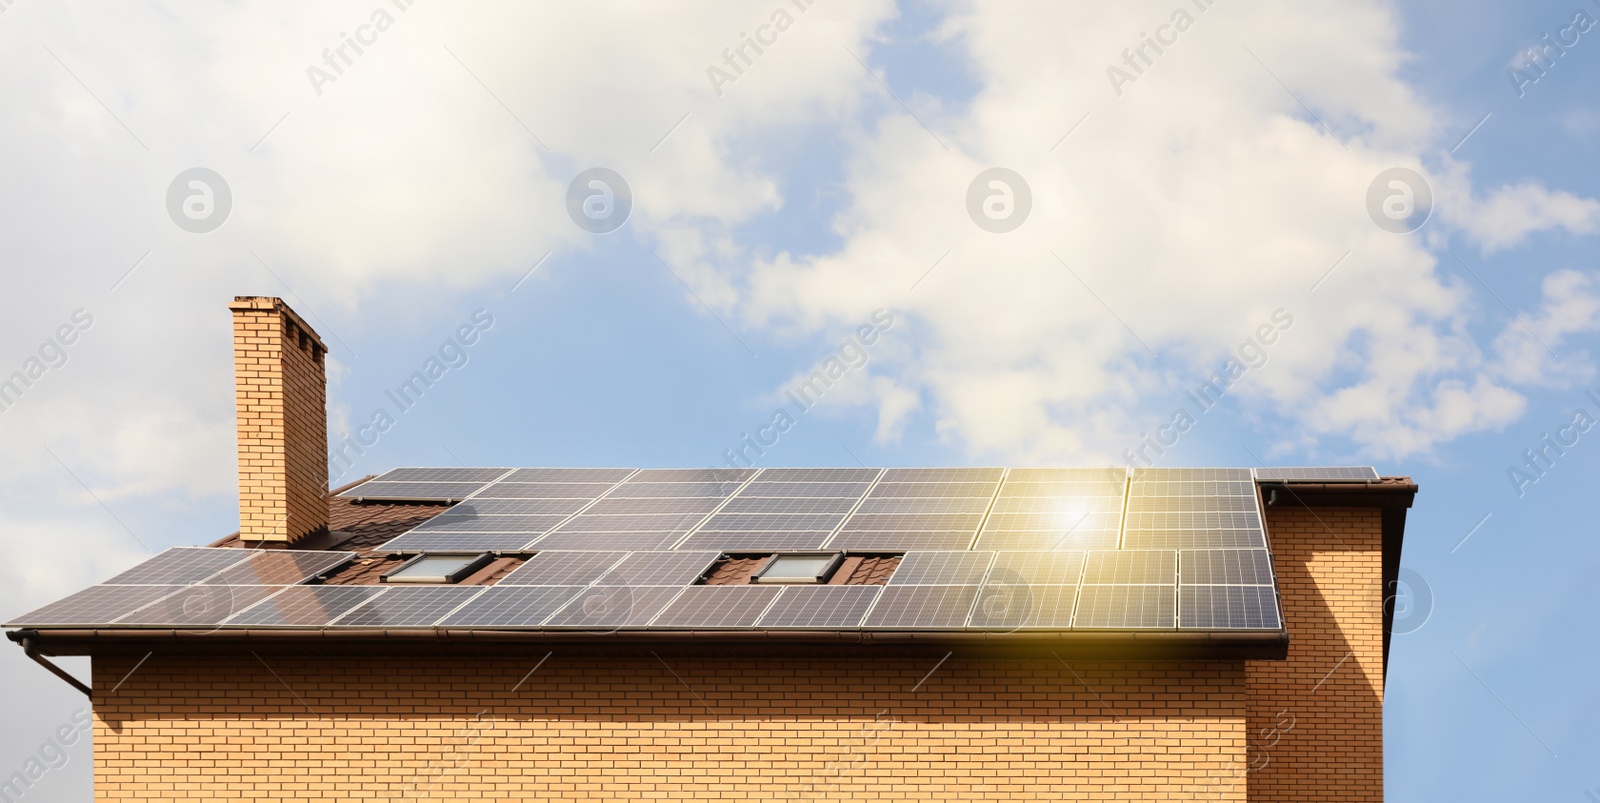 Photo of Building with installed solar panels on roof. Alternative energy source